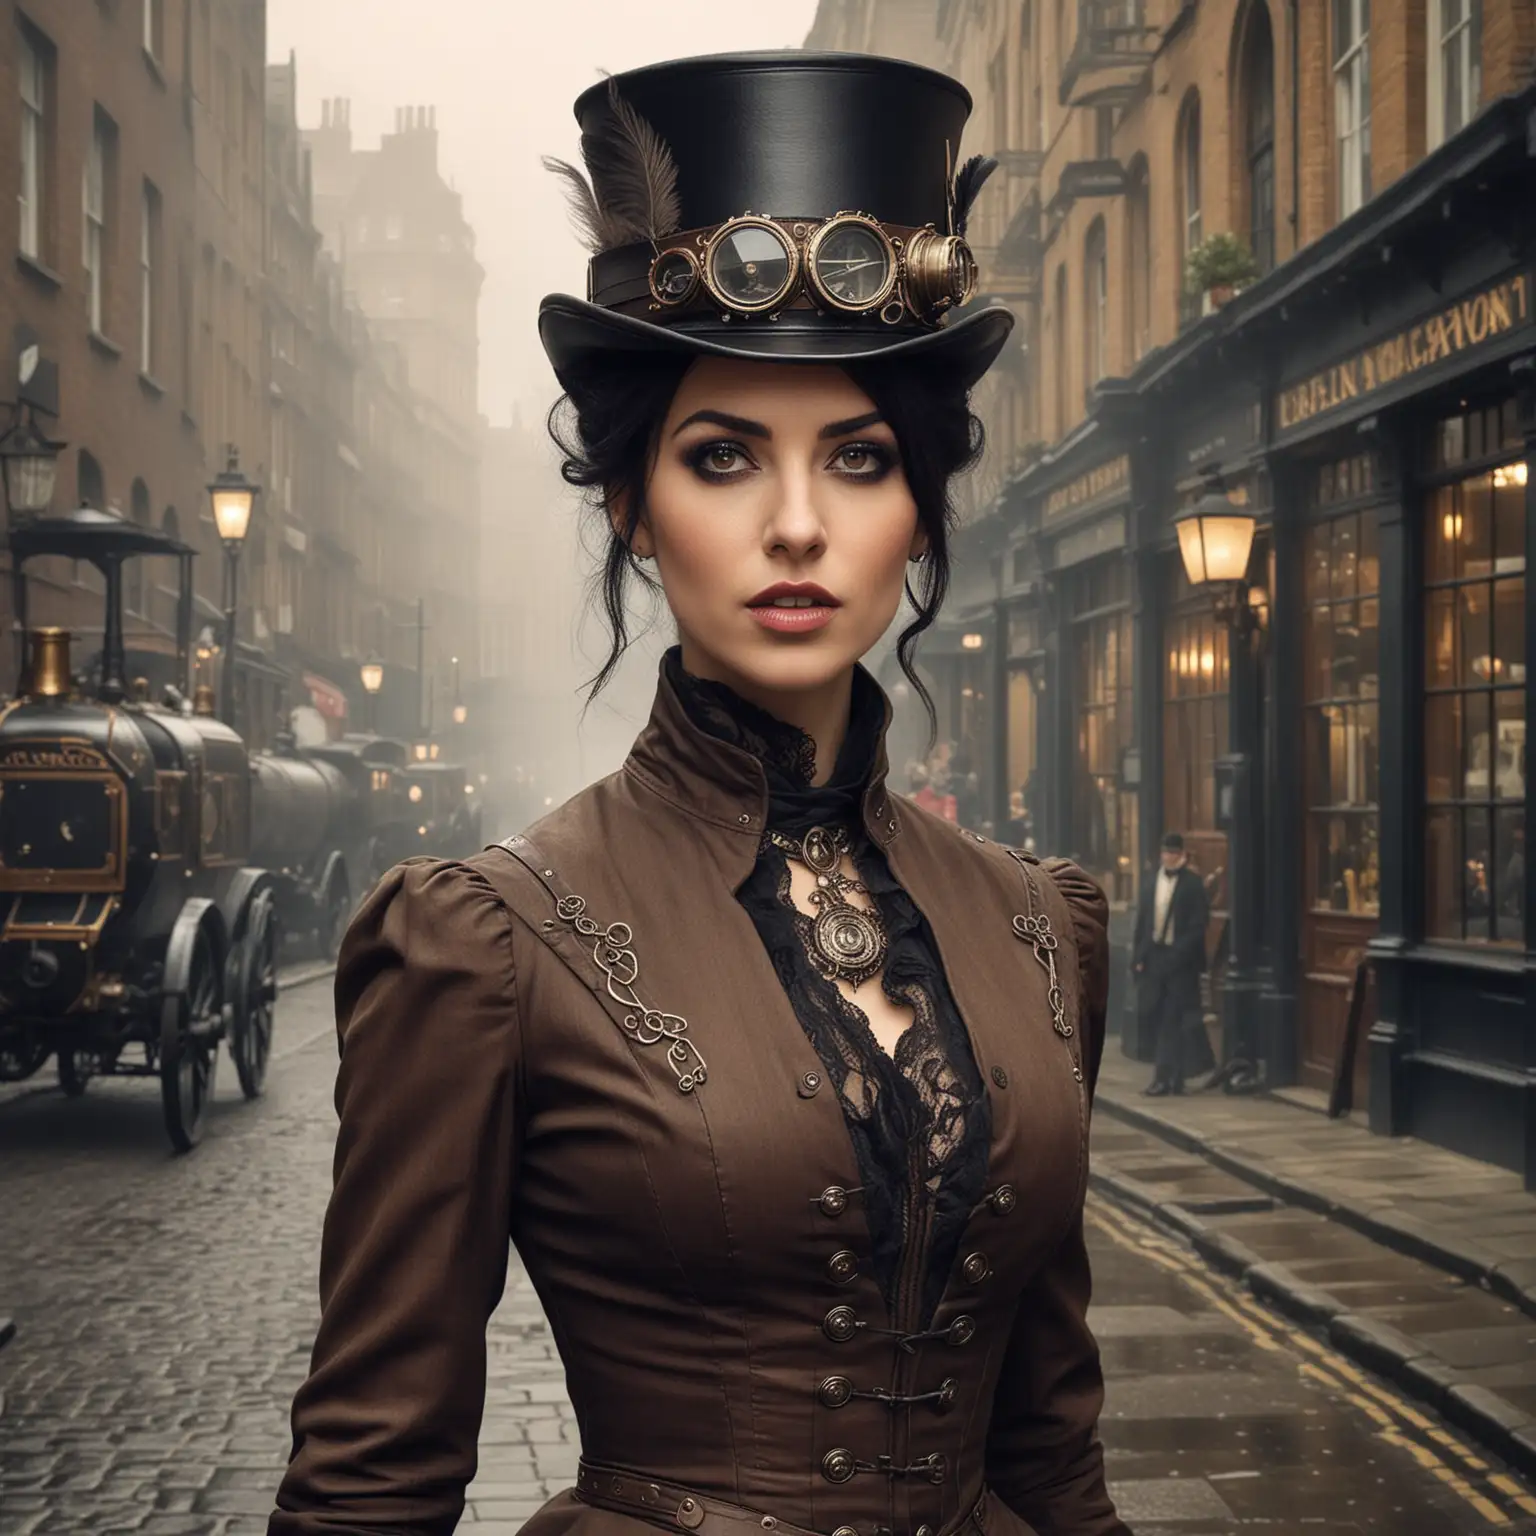 Moody Portrait of Steampunk Lady in Late Victorian Fashion